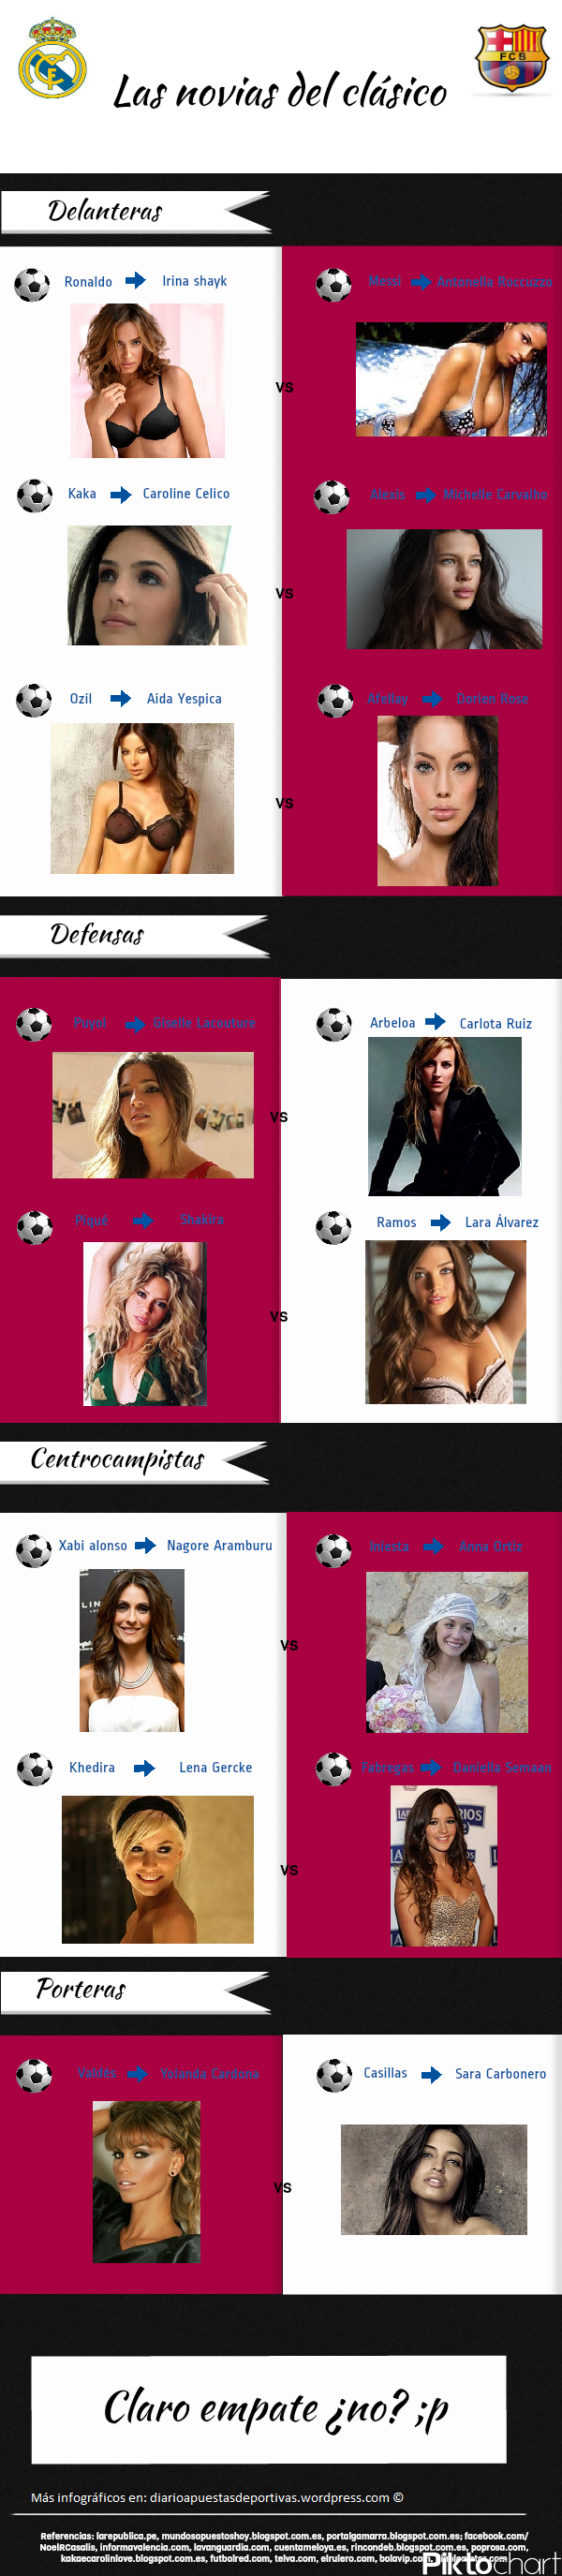 Infographic with the girlfriends of the football players of Real Madrid and Barcelona